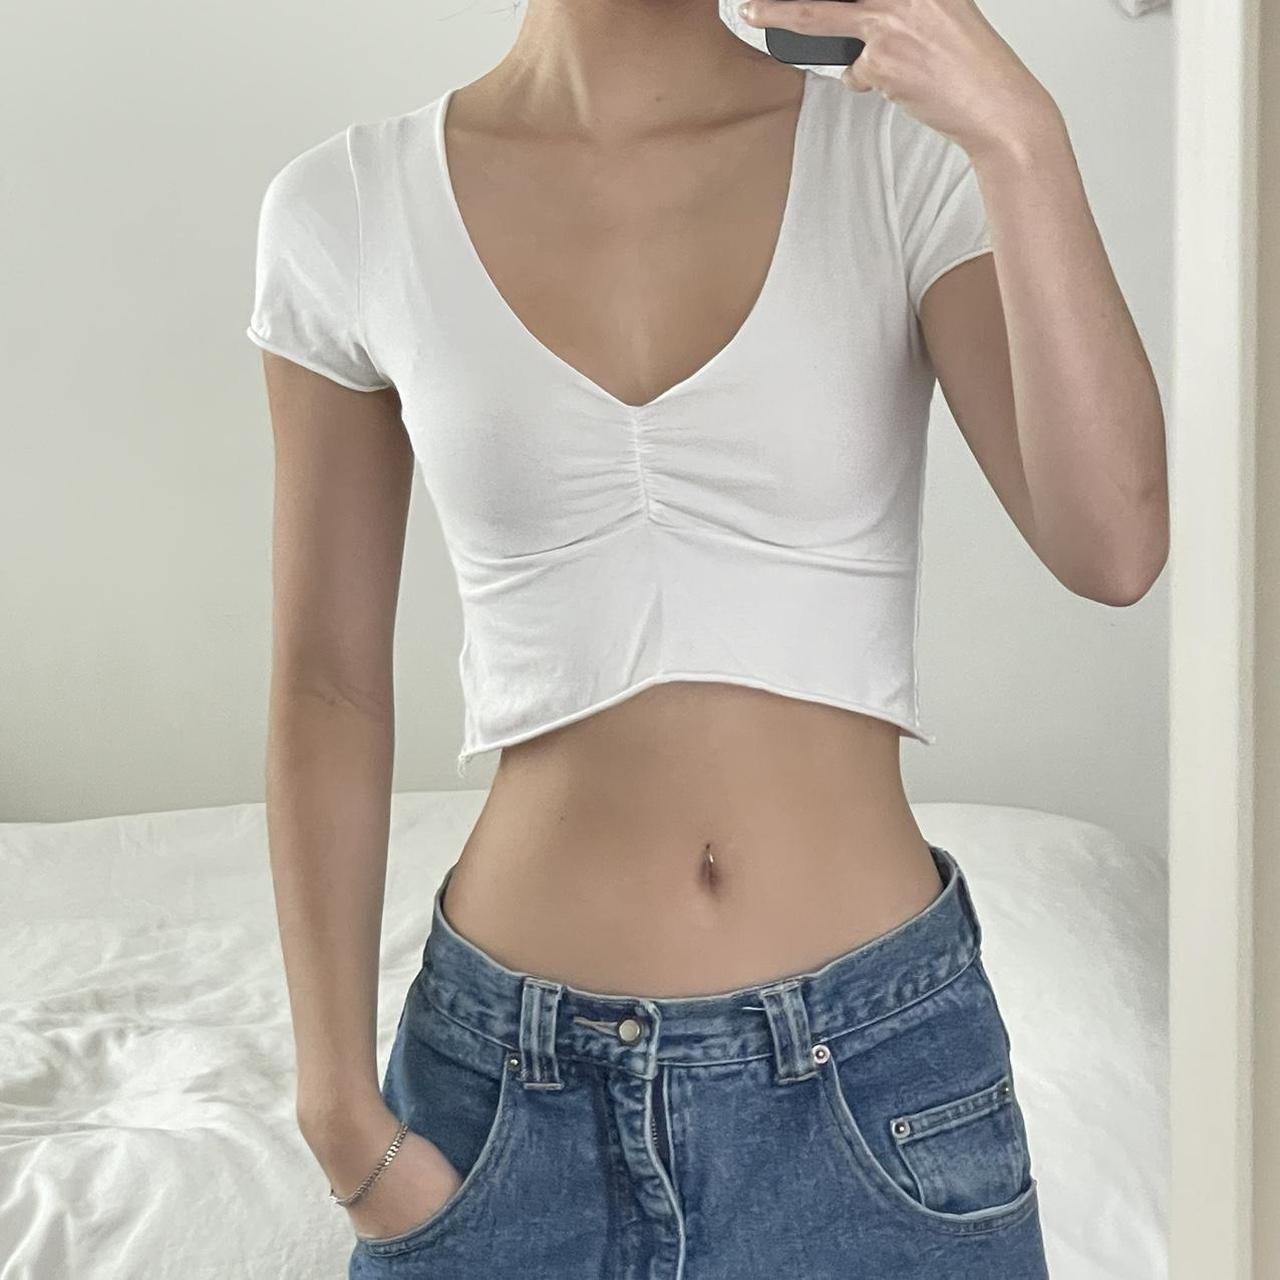 Brandy melville white Gina top cropped, - no flaws